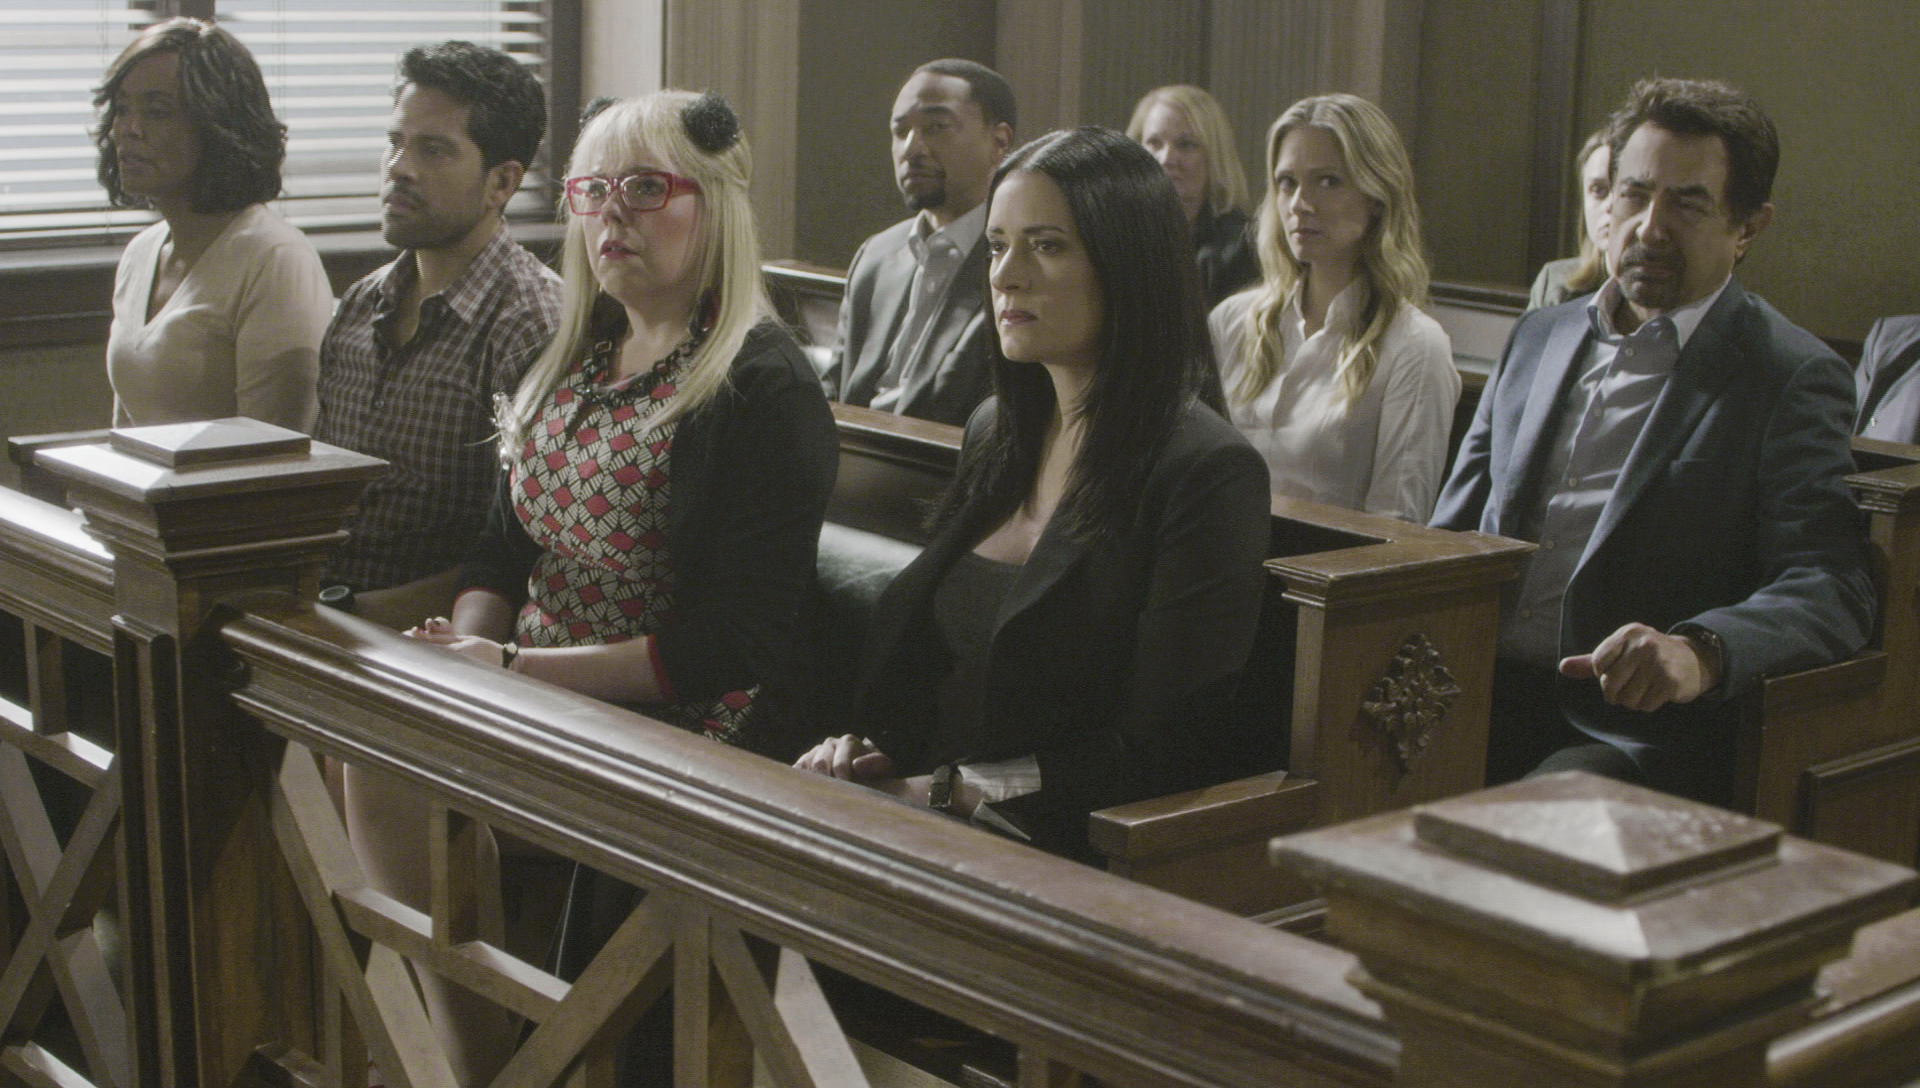 When the entire team supported Reid through every step in the justice system.